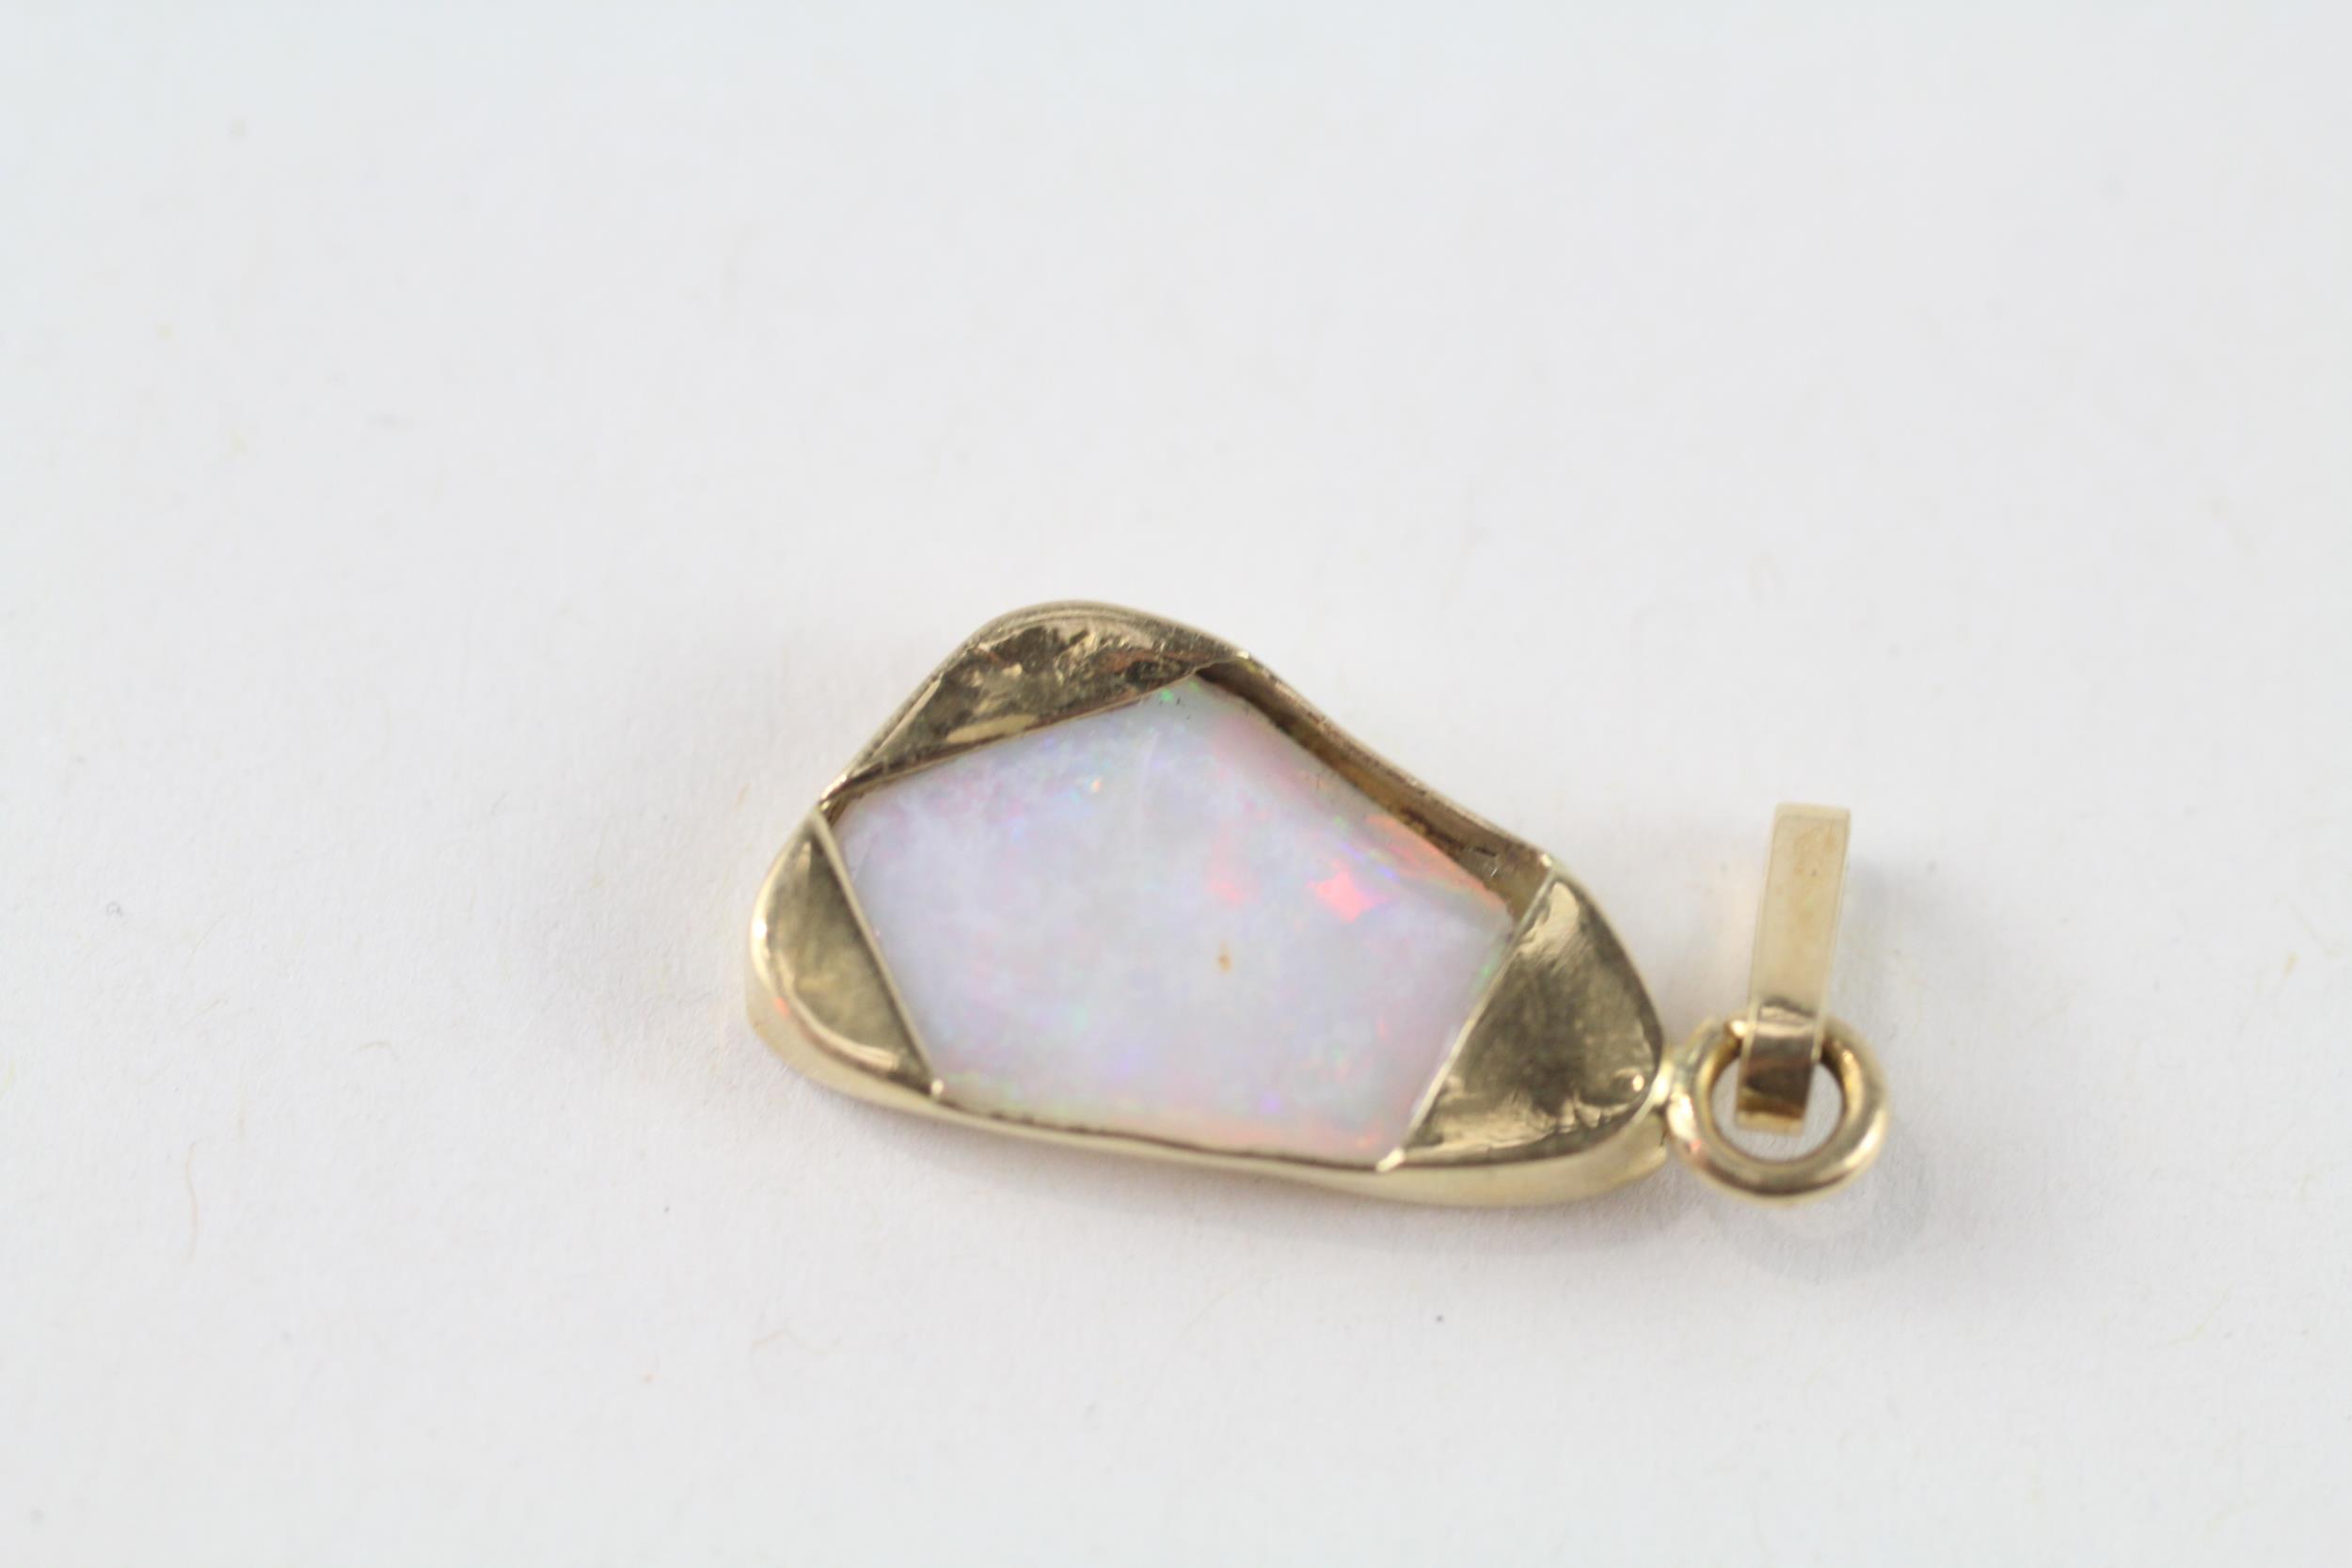 18ct gold opal pendant (1.8g) - Image 4 of 4